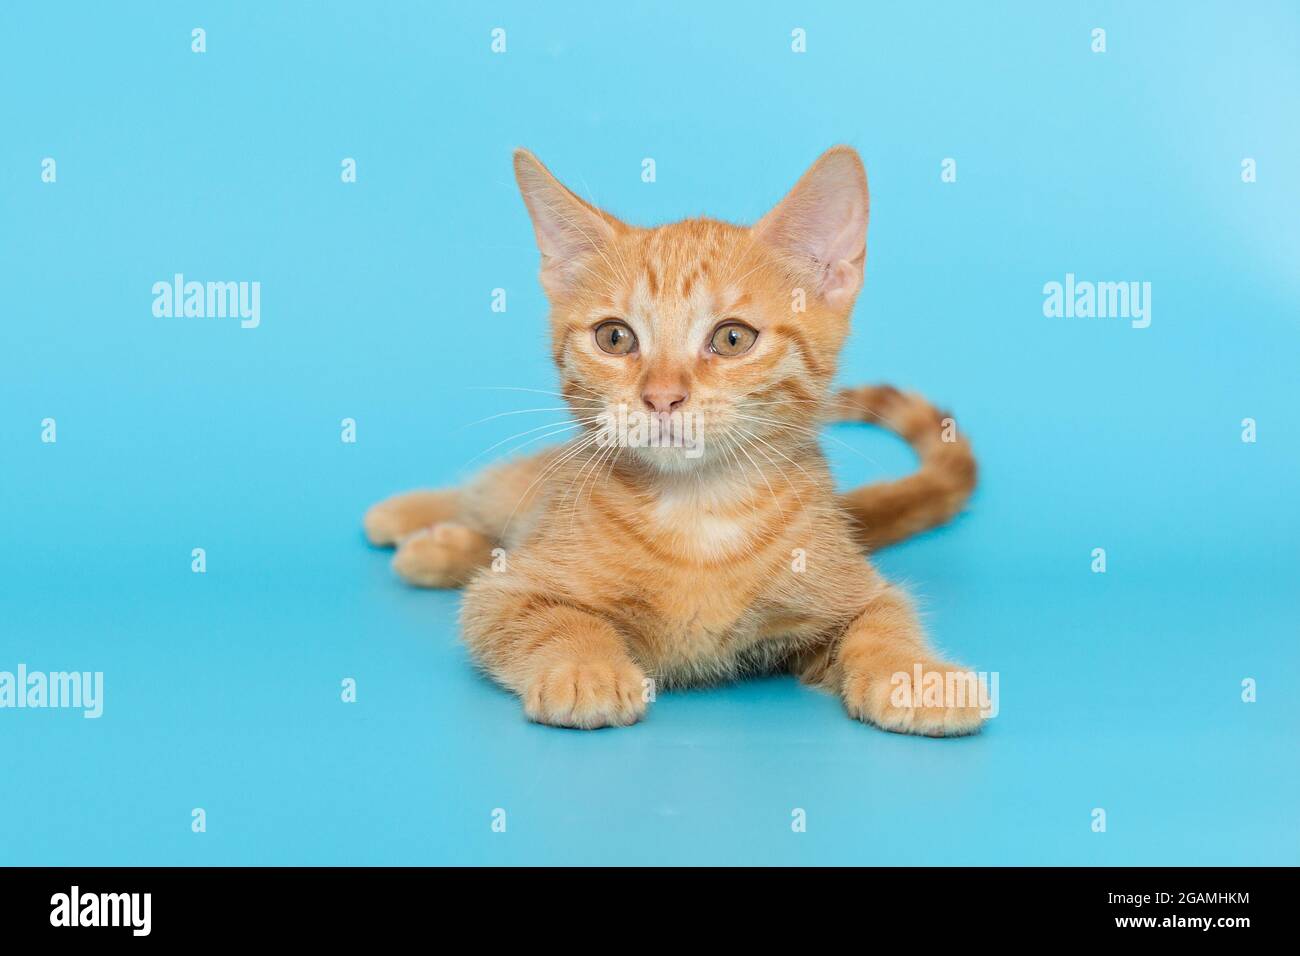 Small red kitten 3 months old, on a blue background Stock Photo